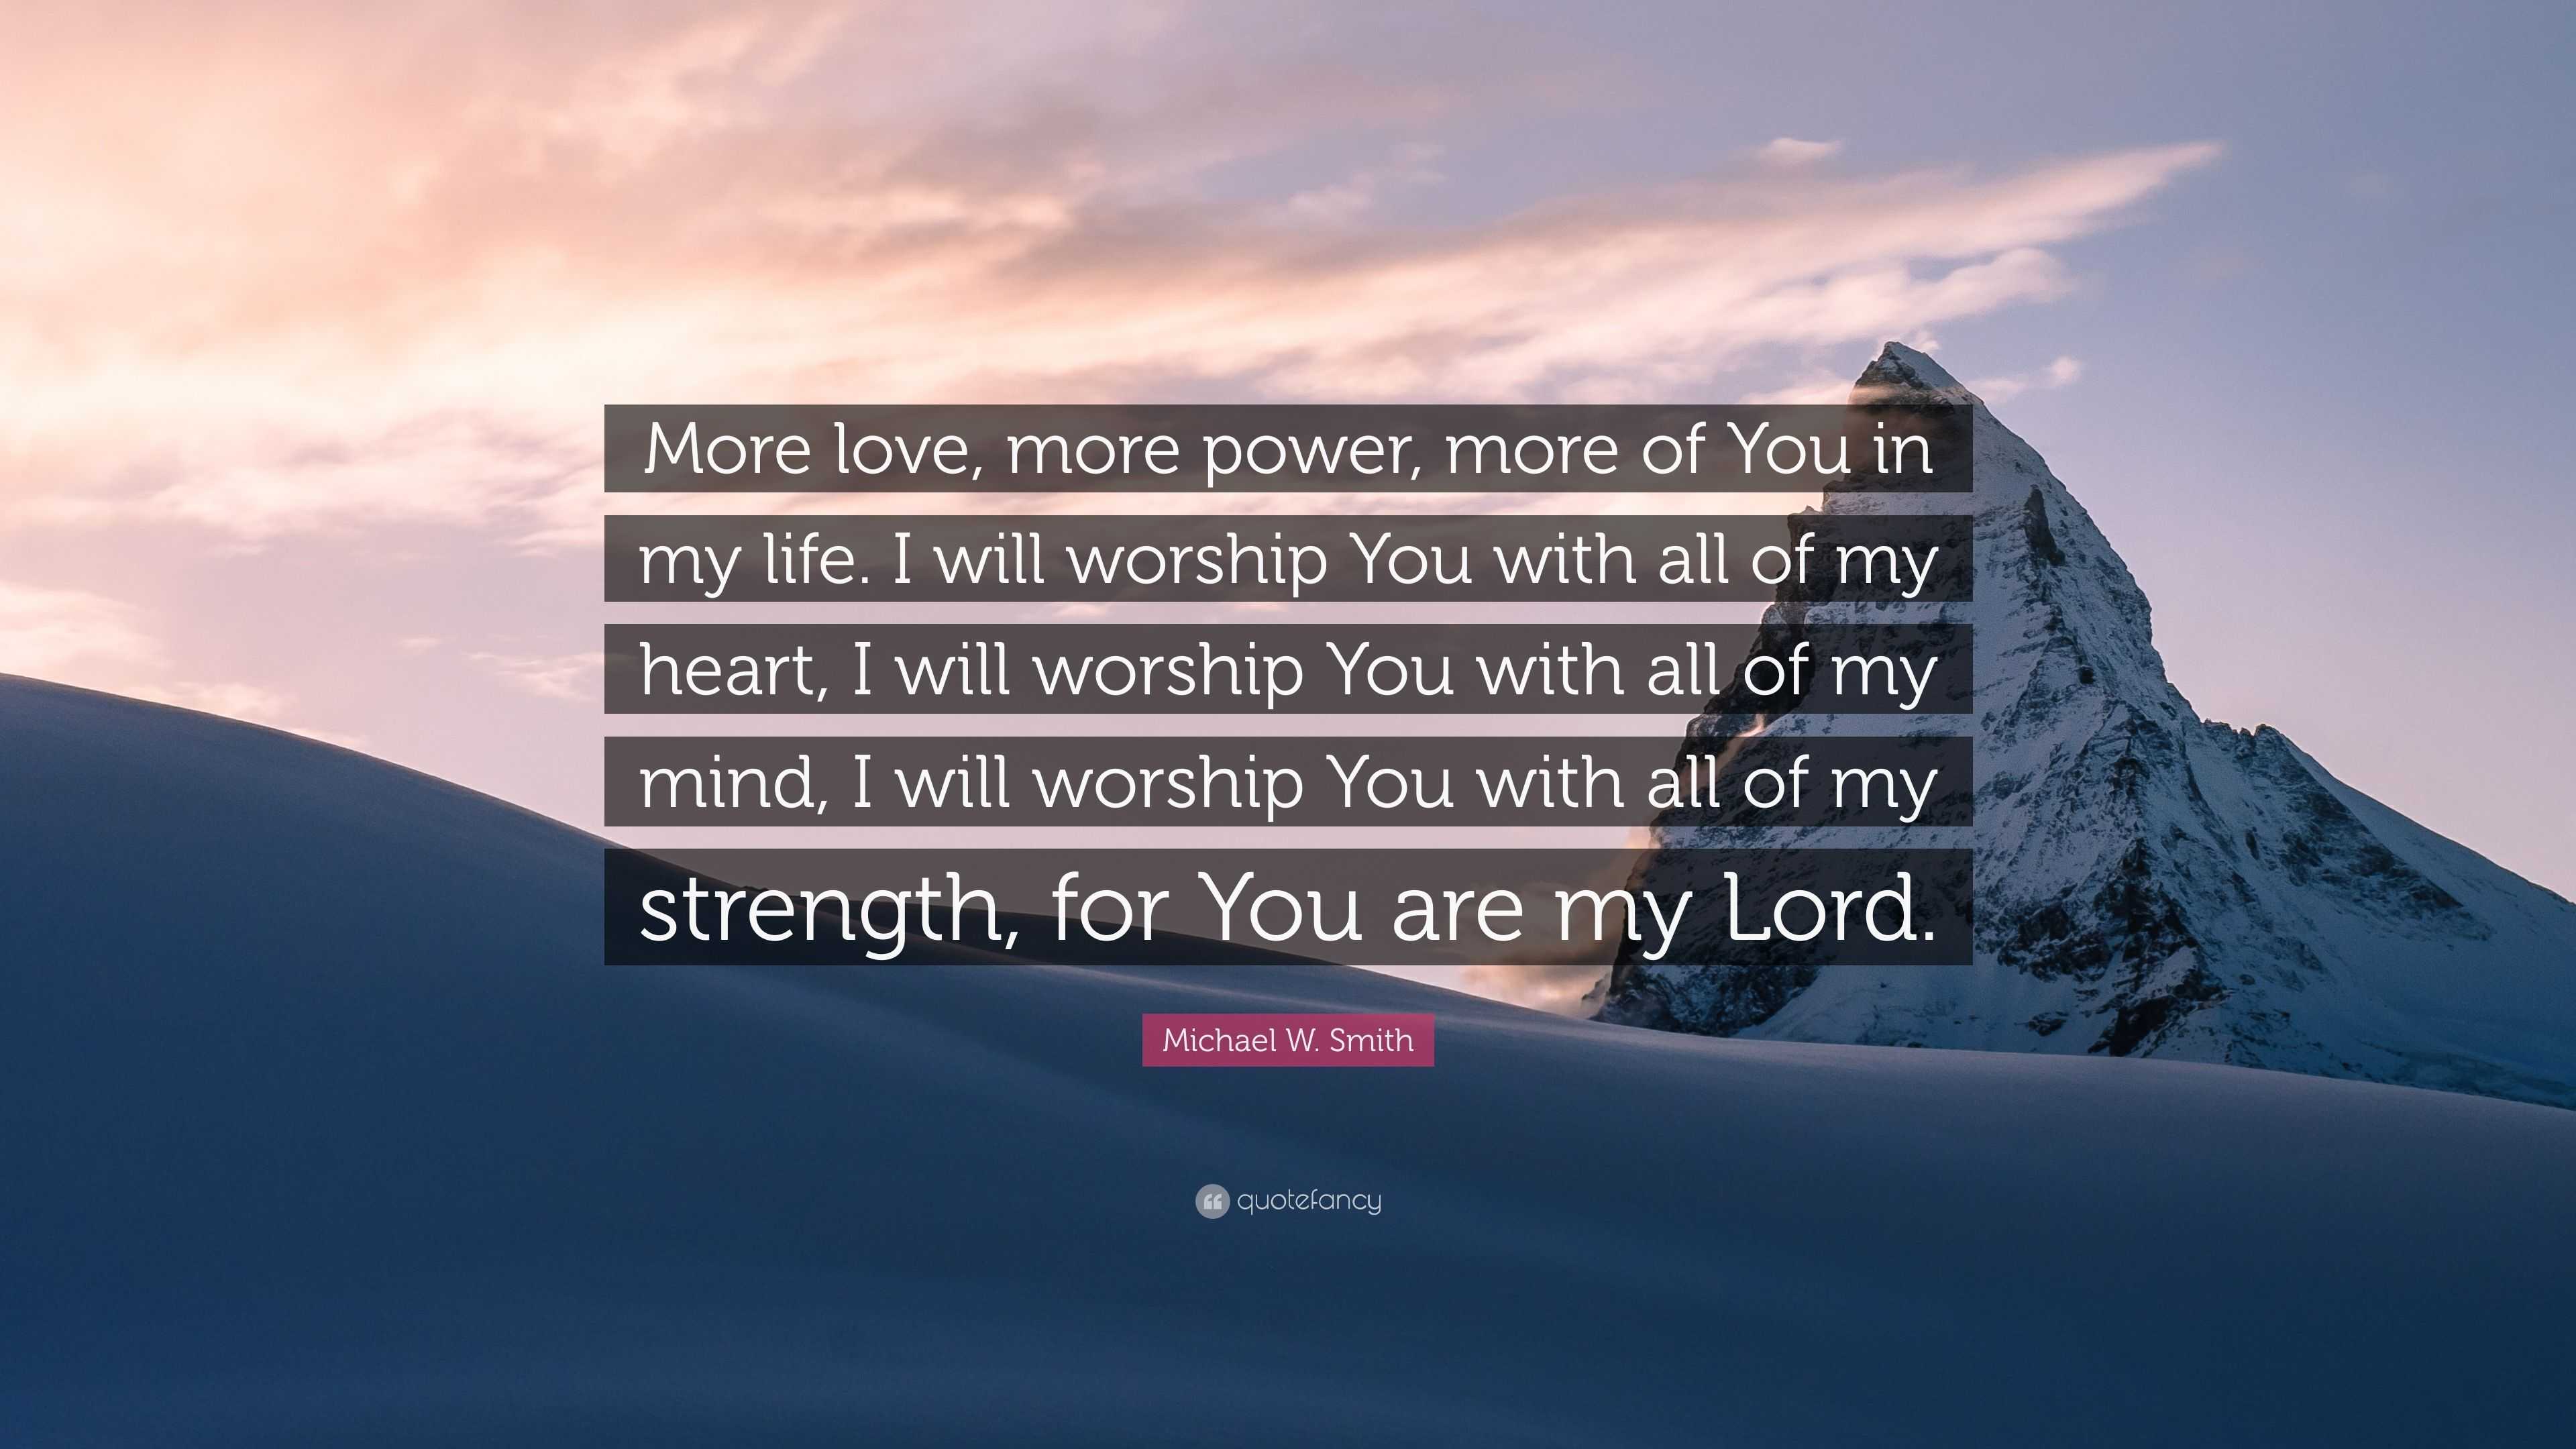 Michael W Smith Quote “More love more power more of You